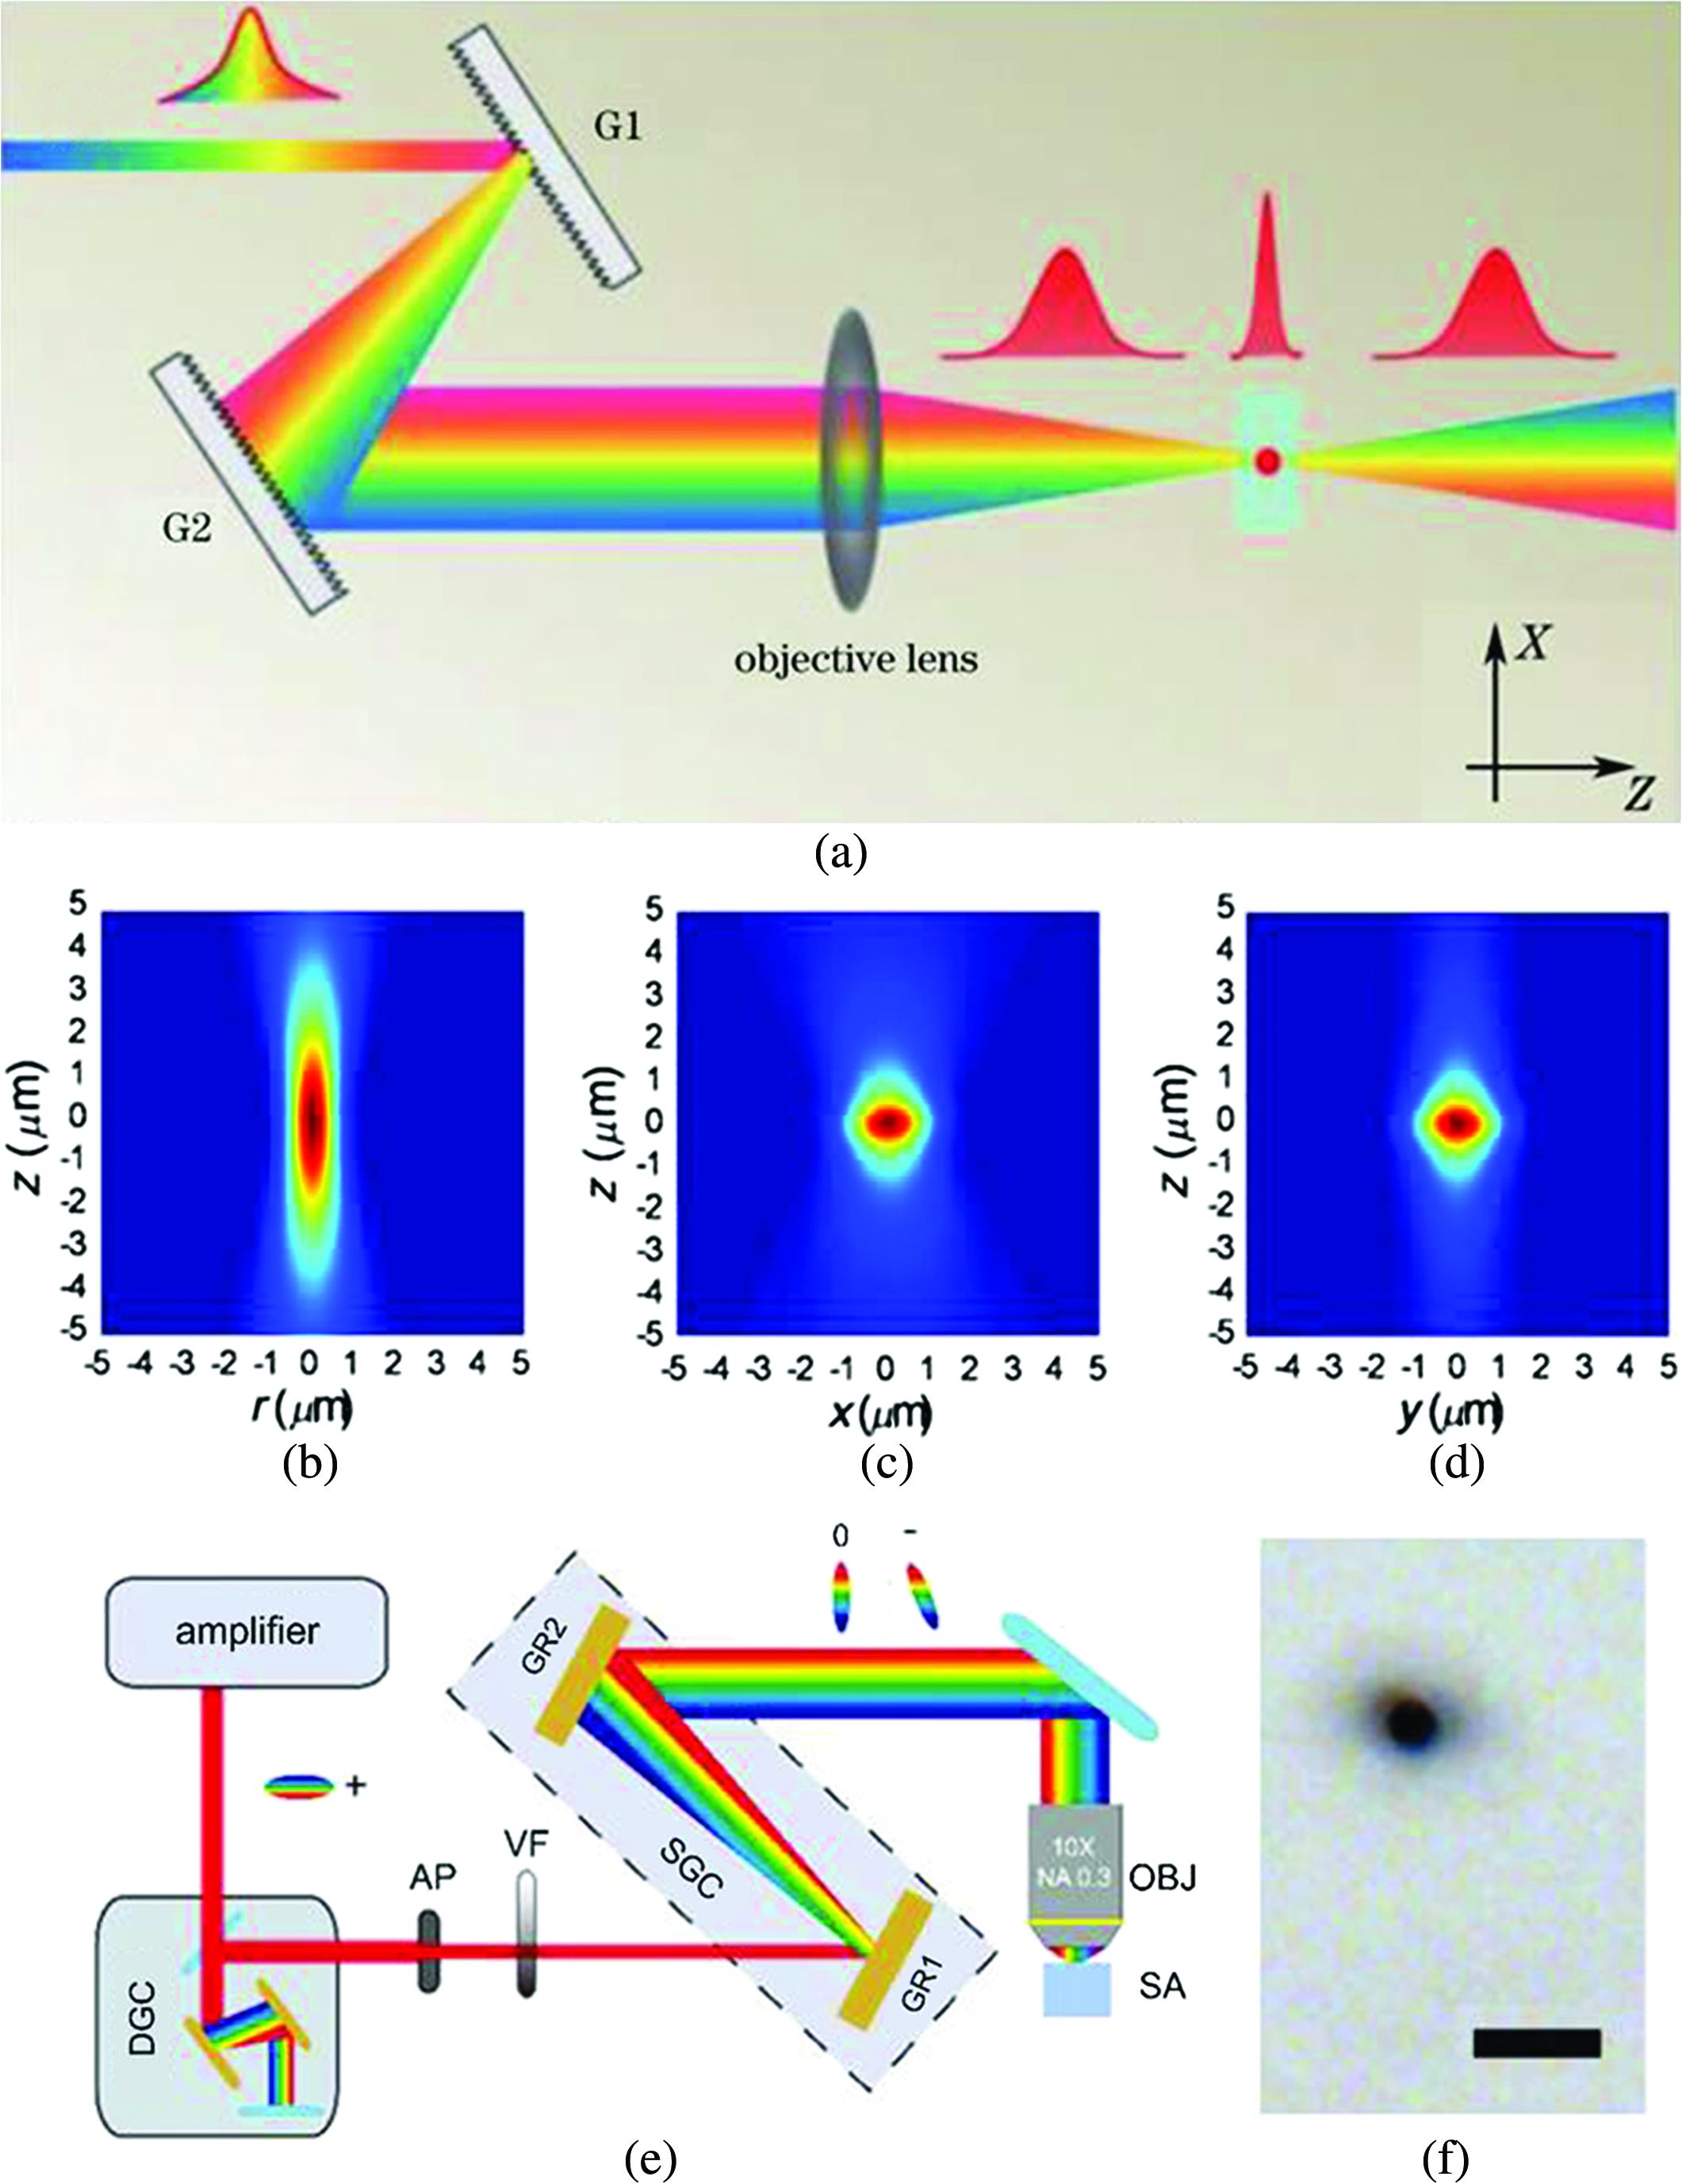 Photonic Circuits Written By Femtosecond Laser In Glass Improved Fabrication And Recent Progress In Photonic Devices